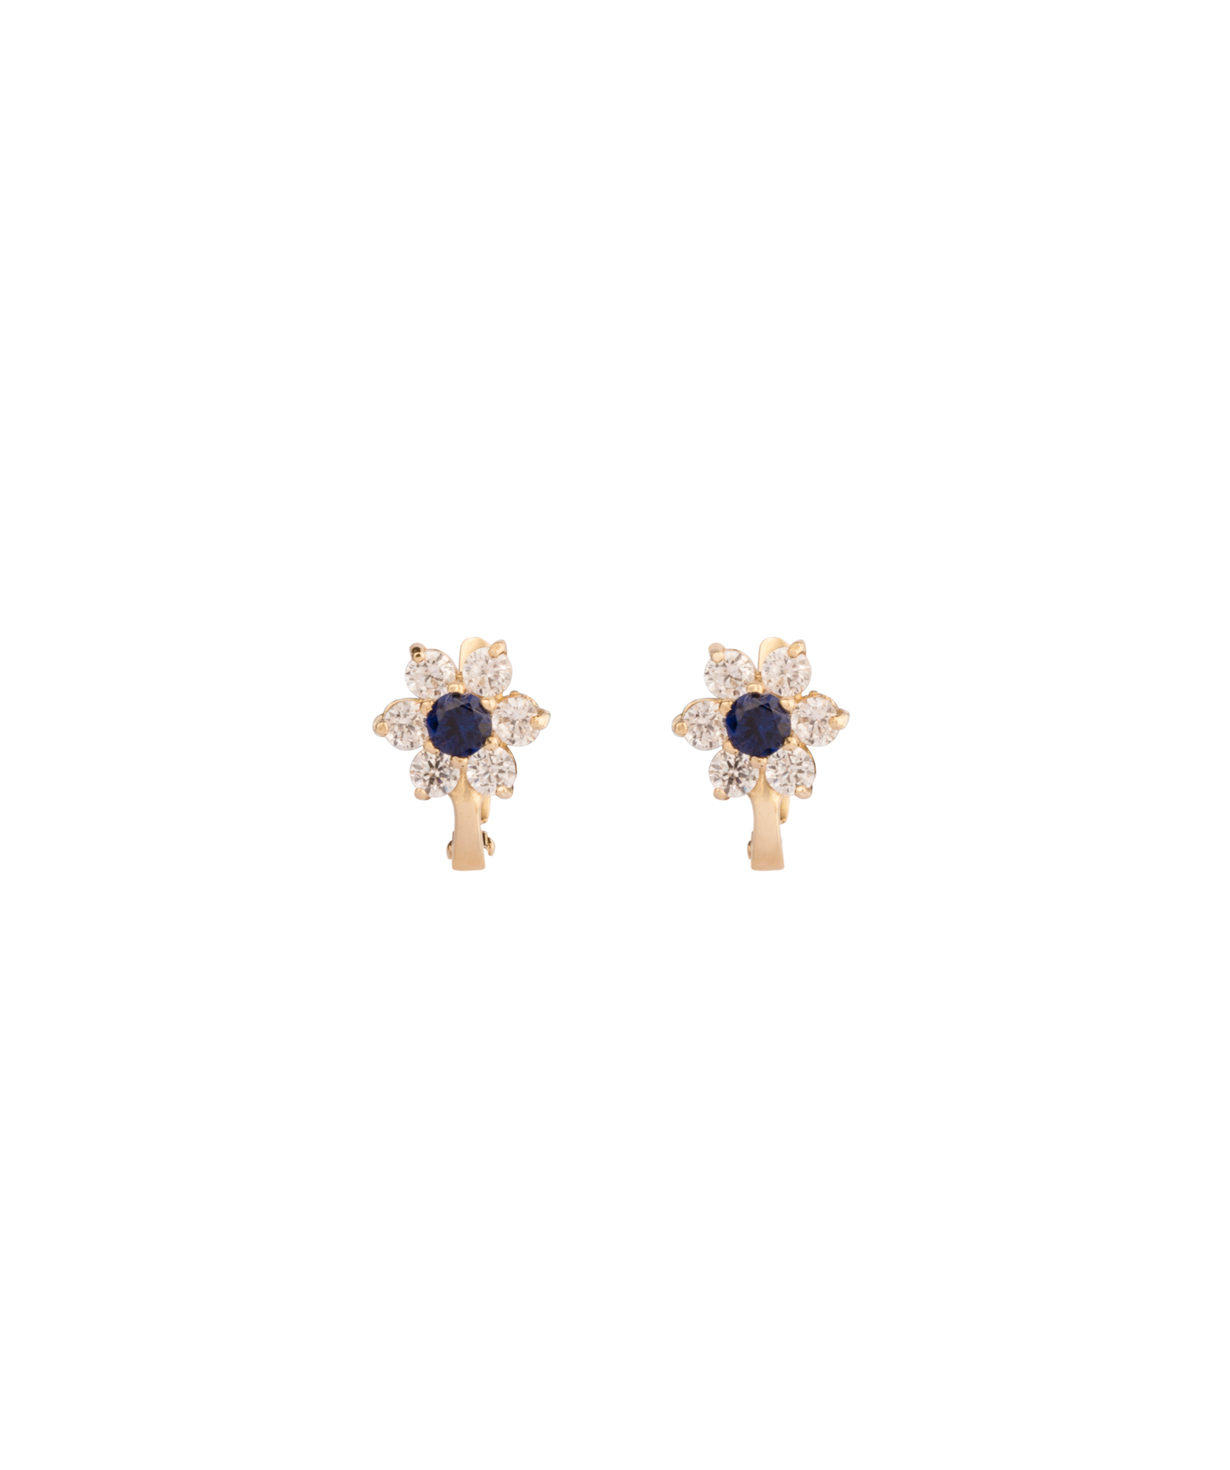 Earrings `Less is more` gold №7